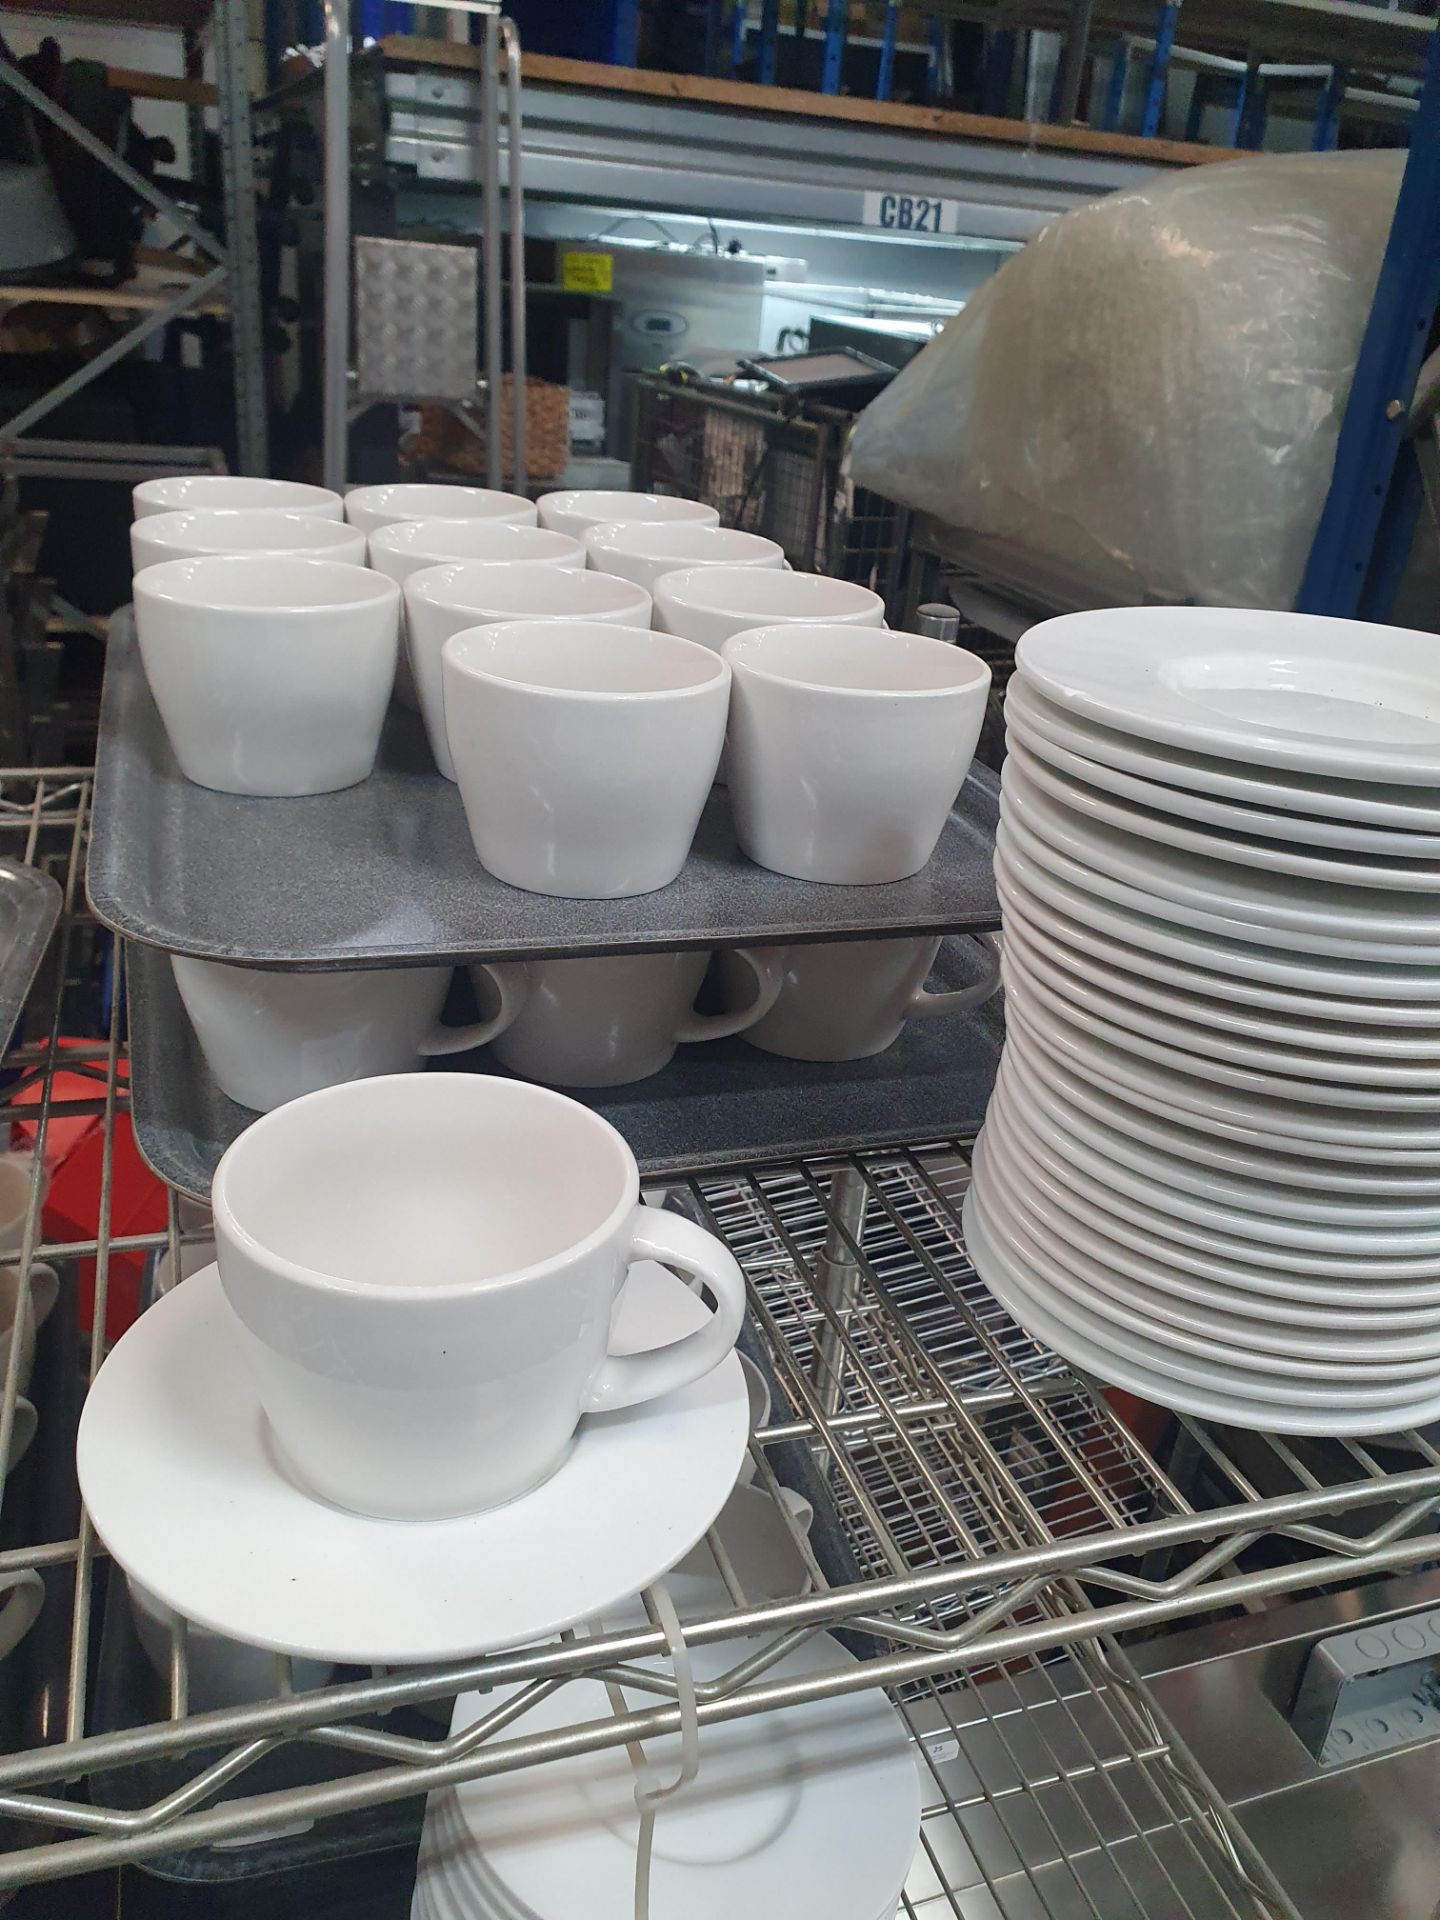 * 24 x coffee cups and saucers